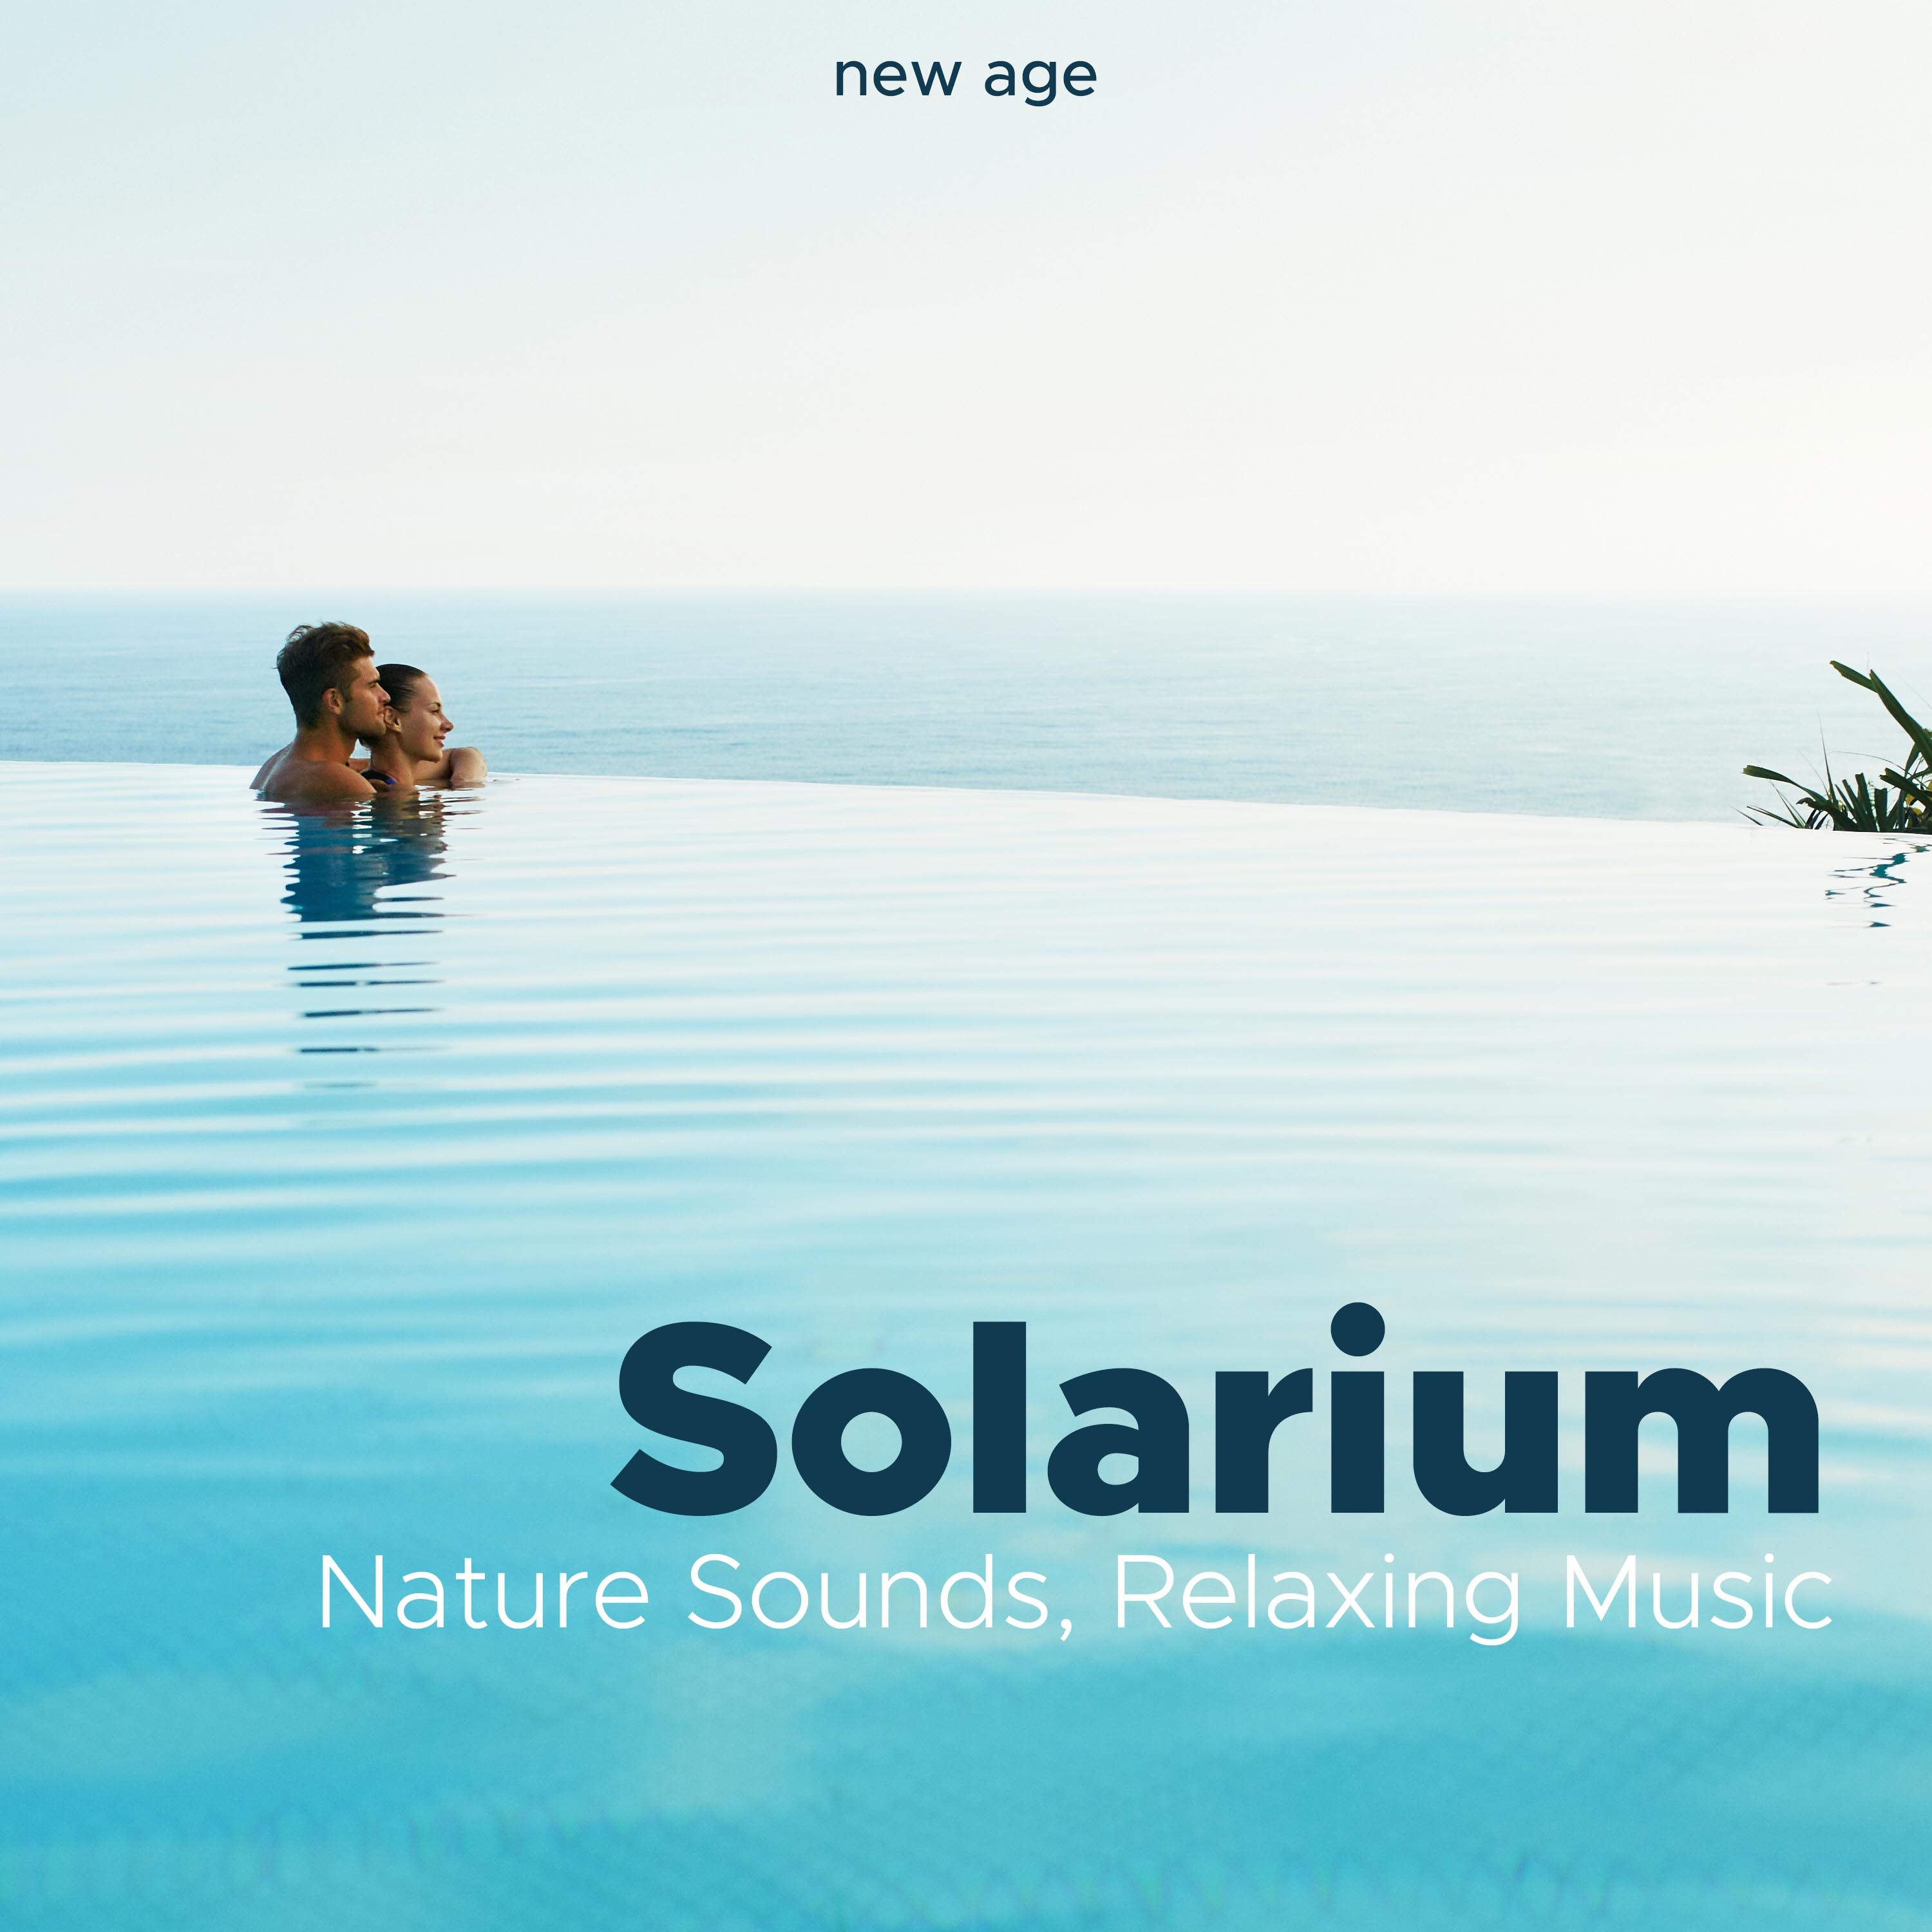 Solarium - Nature Sounds, Relaxing Music for Serenity, Tranquility and Peace